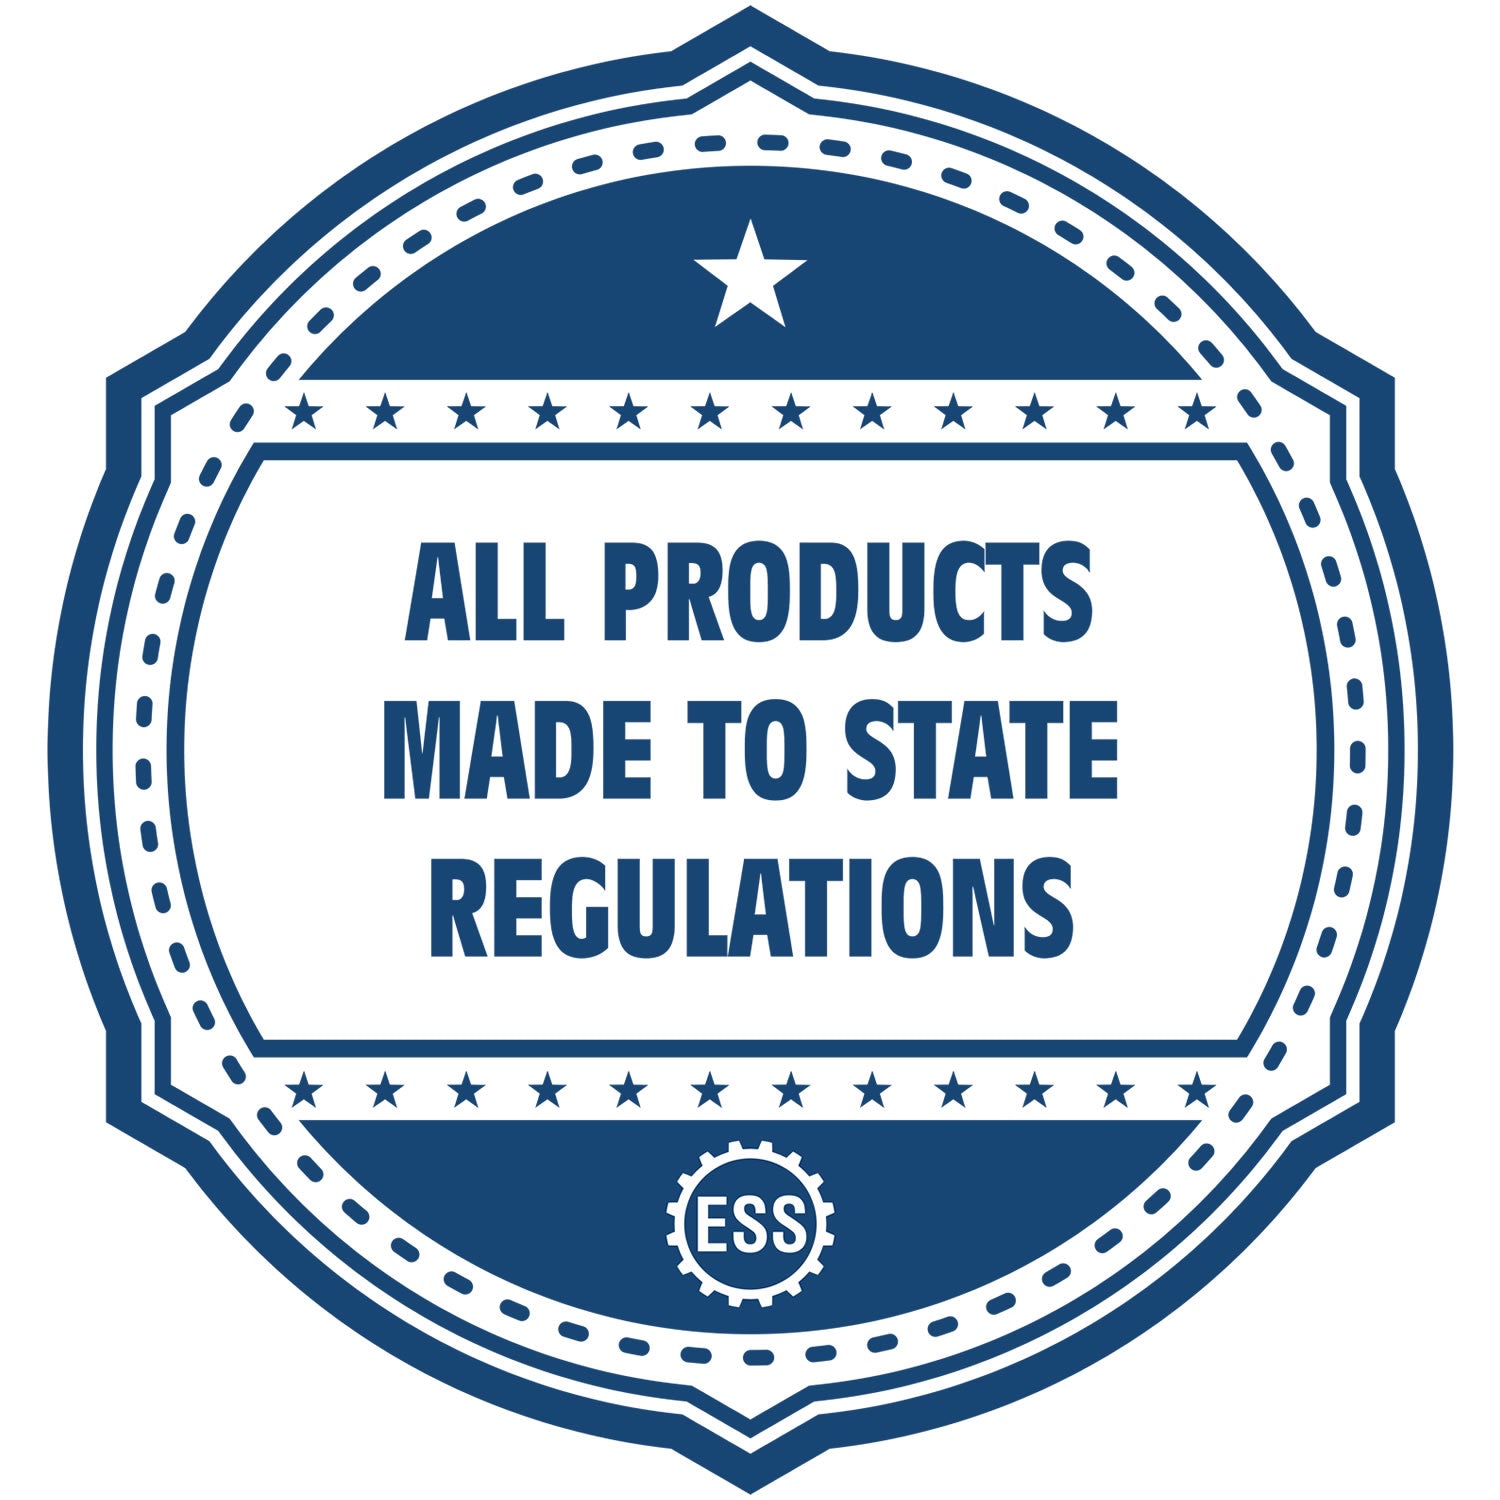 An icon or badge element for the Self-Inking Iowa PE Stamp showing that this product is made in compliance with state regulations.